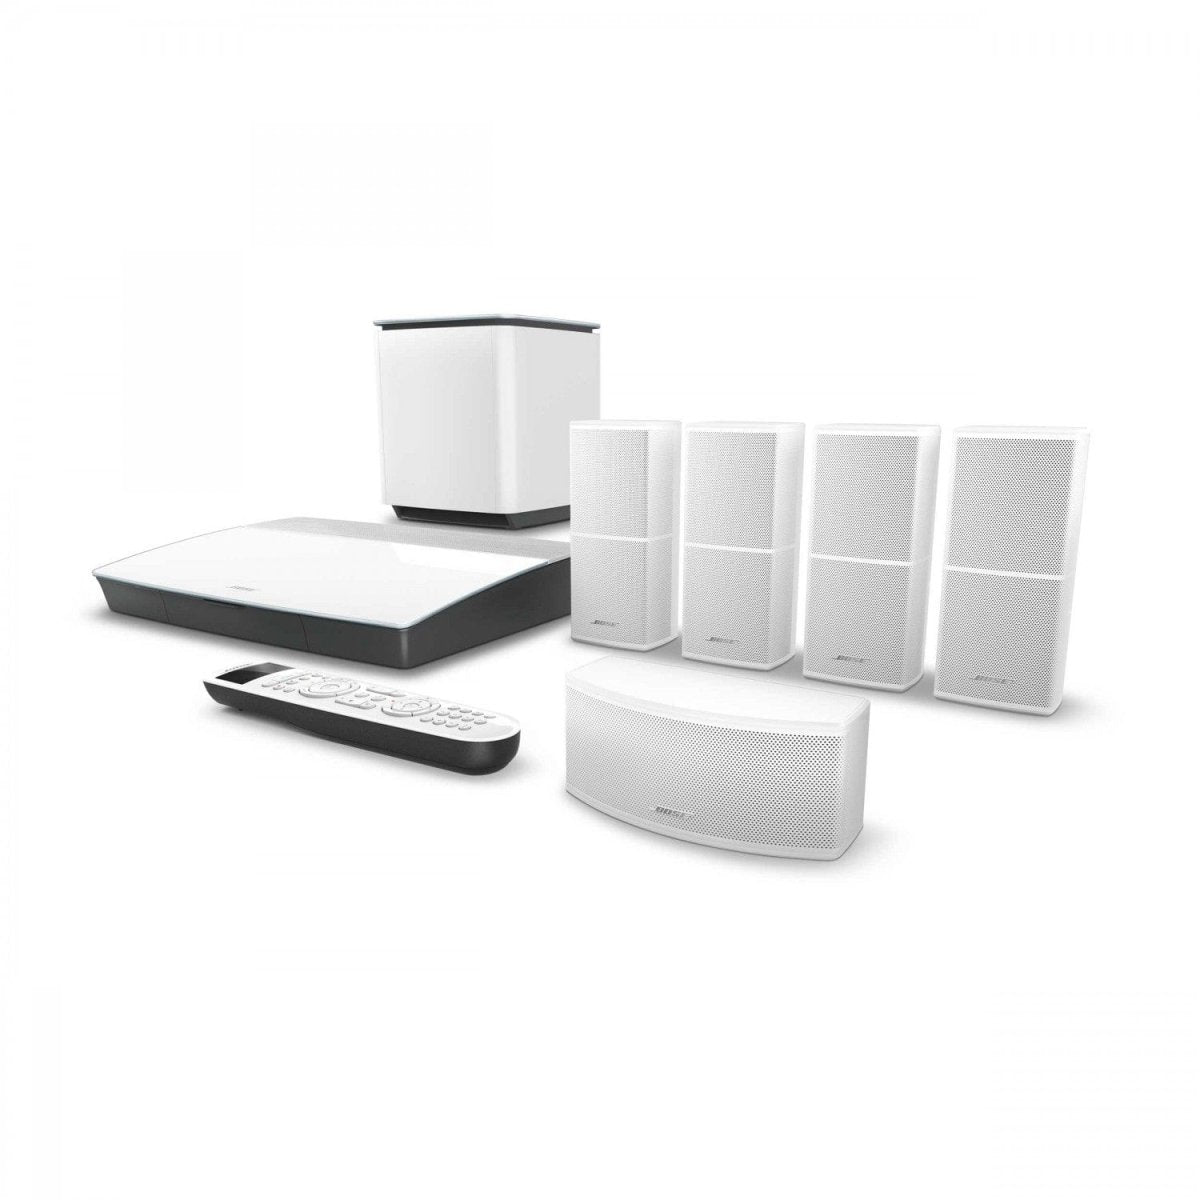 BOSE Lifestyle 600 5.1 Channel Home Theatre Speaker System - White (Manufacturer Refurbished) | Atlantic Electrics